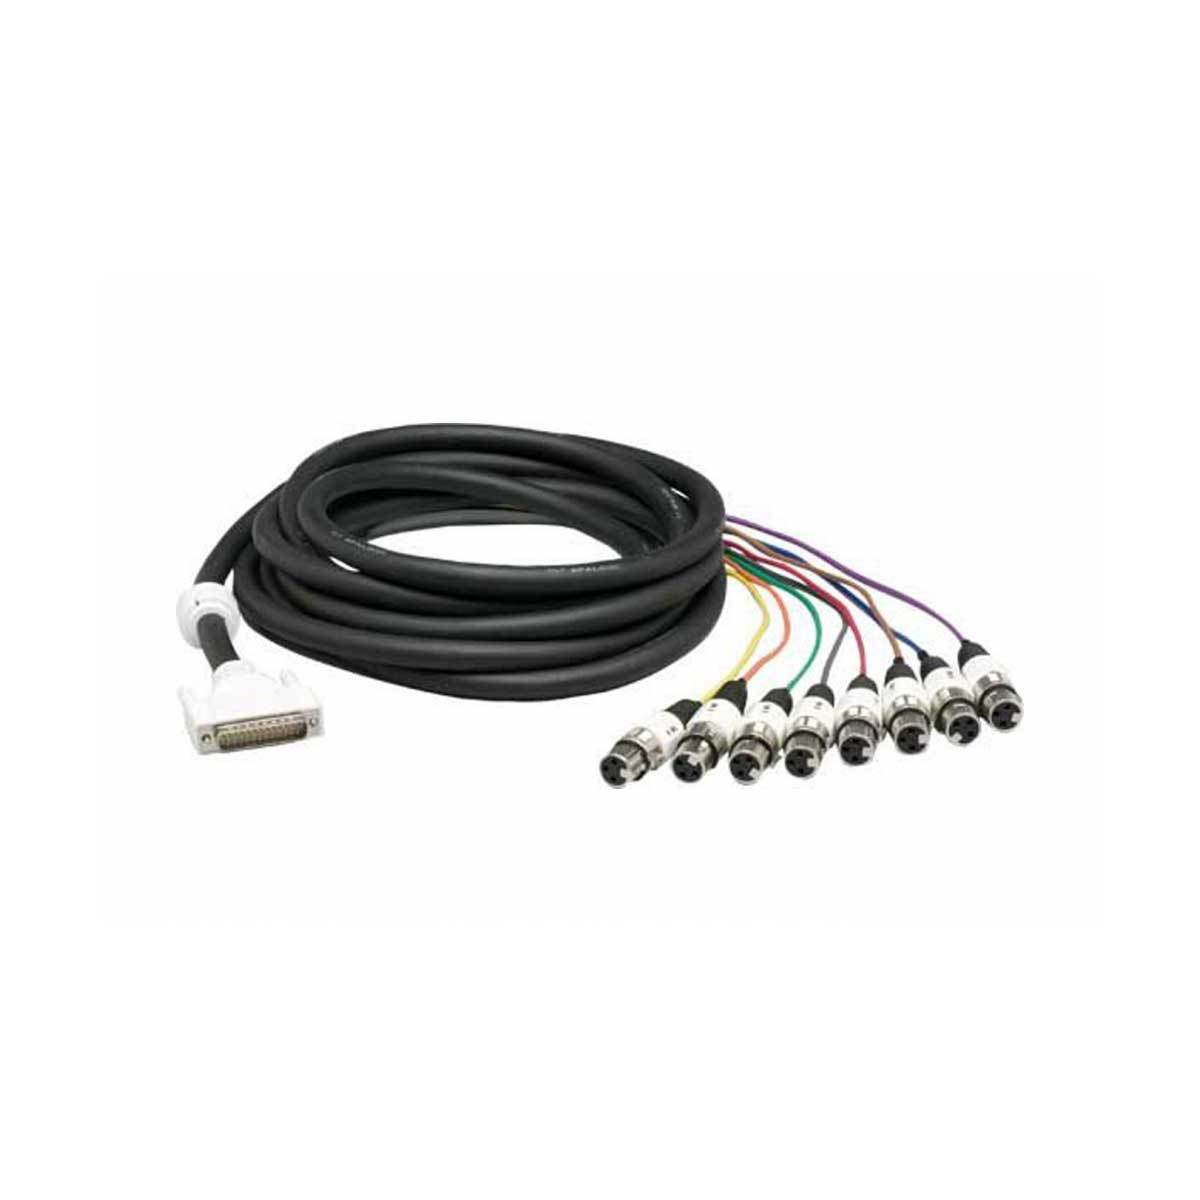 Cables & Adapters - Lynx CBL-AIN85 - Eight-Channel XLR Analog Input Cable For Aurora Converters